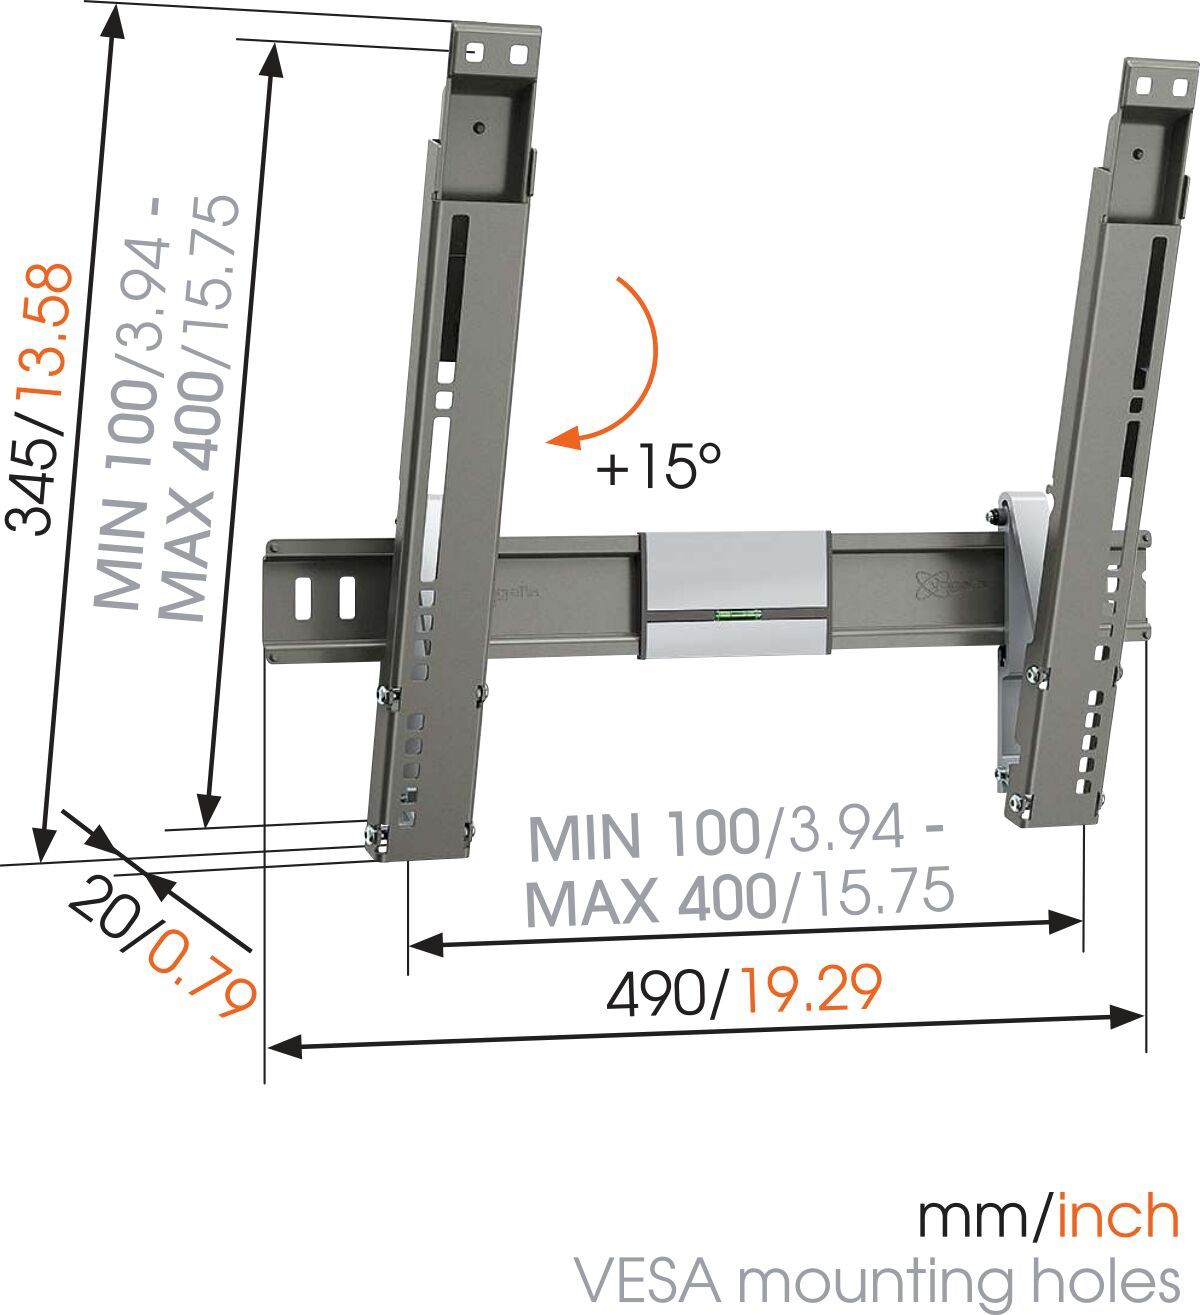 Vogel's THIN 215 UltraThin Tilting TV Wall Mount - Suitable for 26 up to 55 inch TVs up to Tilt up to 15° - Dimensions